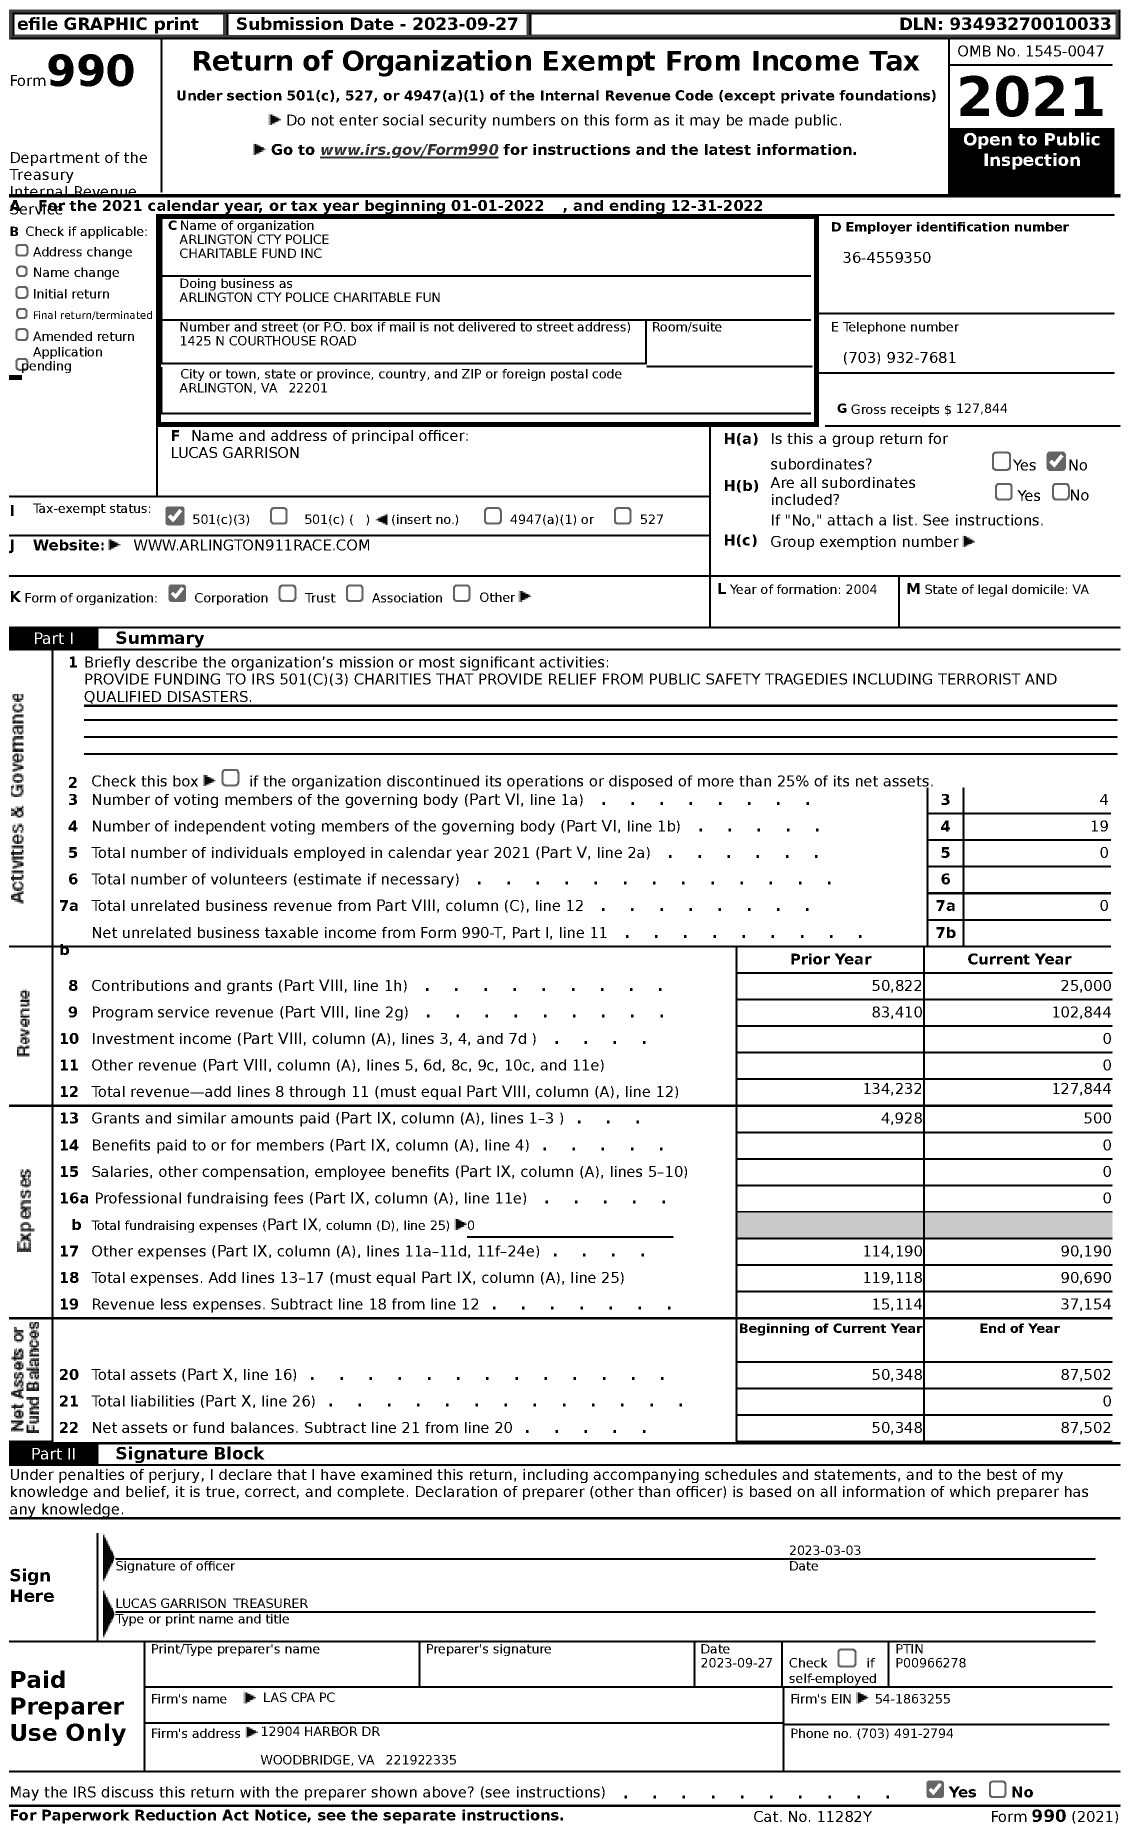 Image of first page of 2022 Form 990 for Arlington Cty Police Charitable Fund